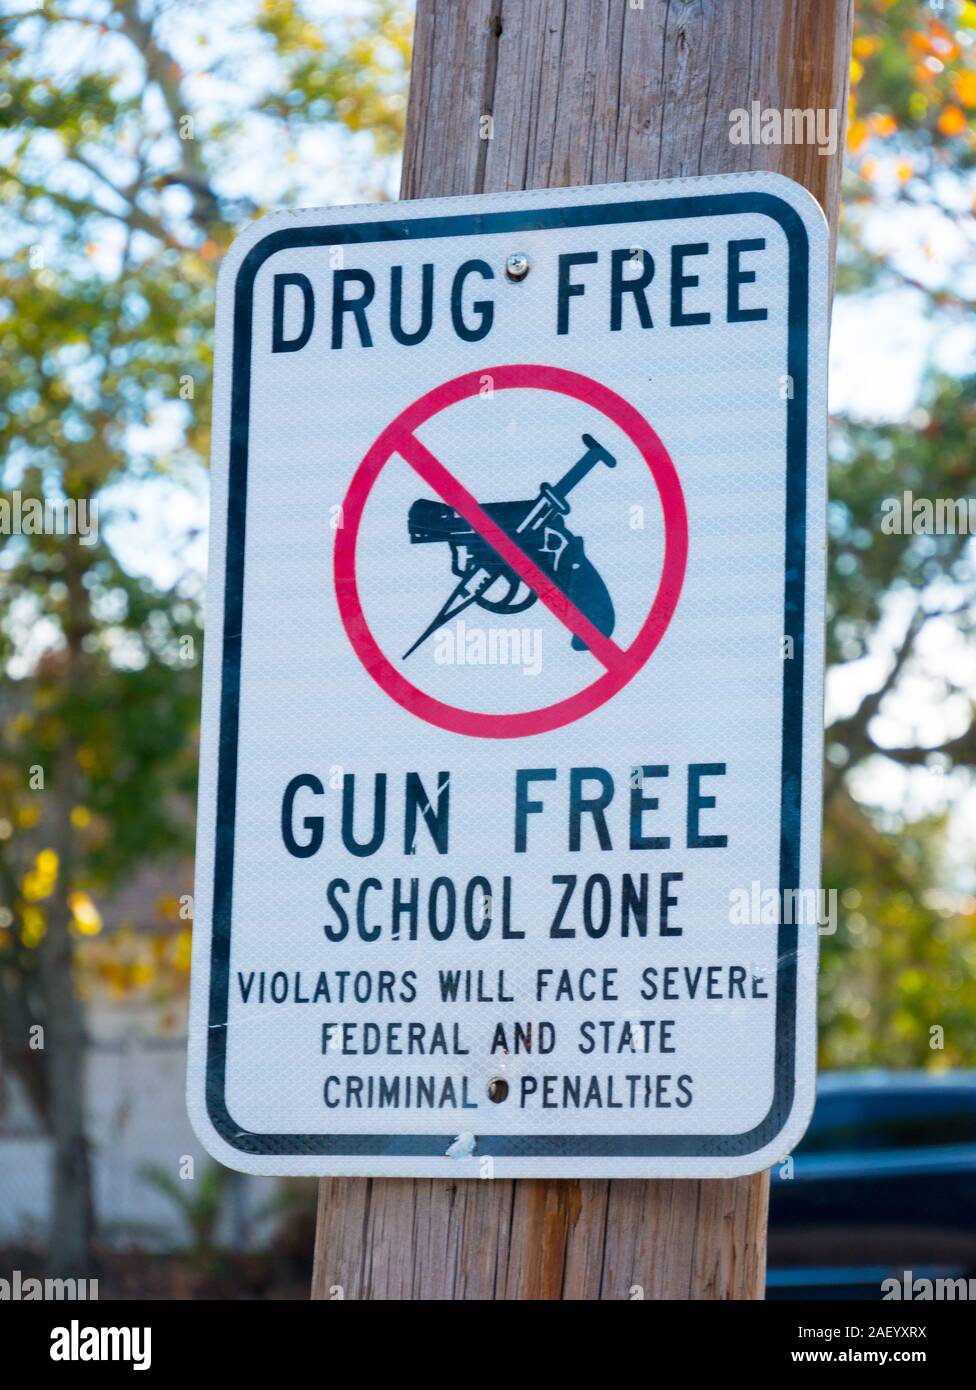 Drug Free and Gun Free School Zone sign in New Orleans, Louisiana, USA. Stock Photo